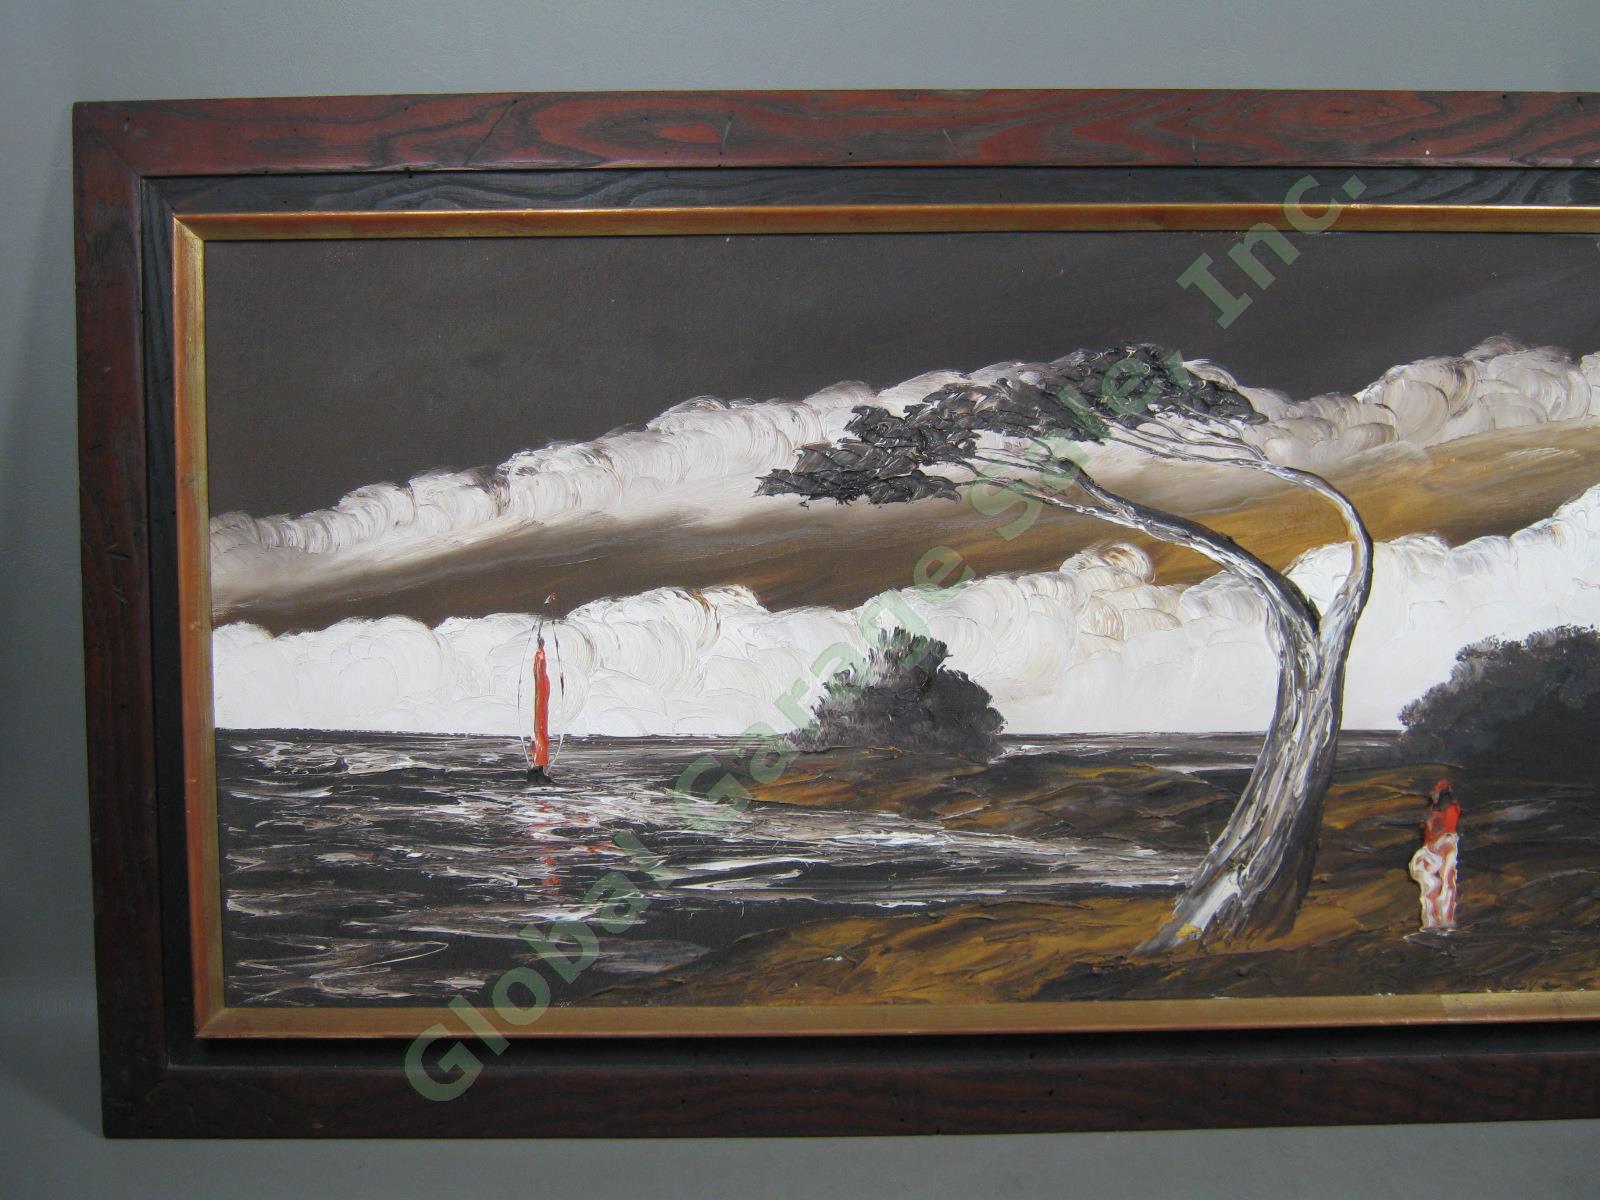 Vtg Original Signed Homer Costello Abstract Landscape Oil Painting On Canvas NR! 1